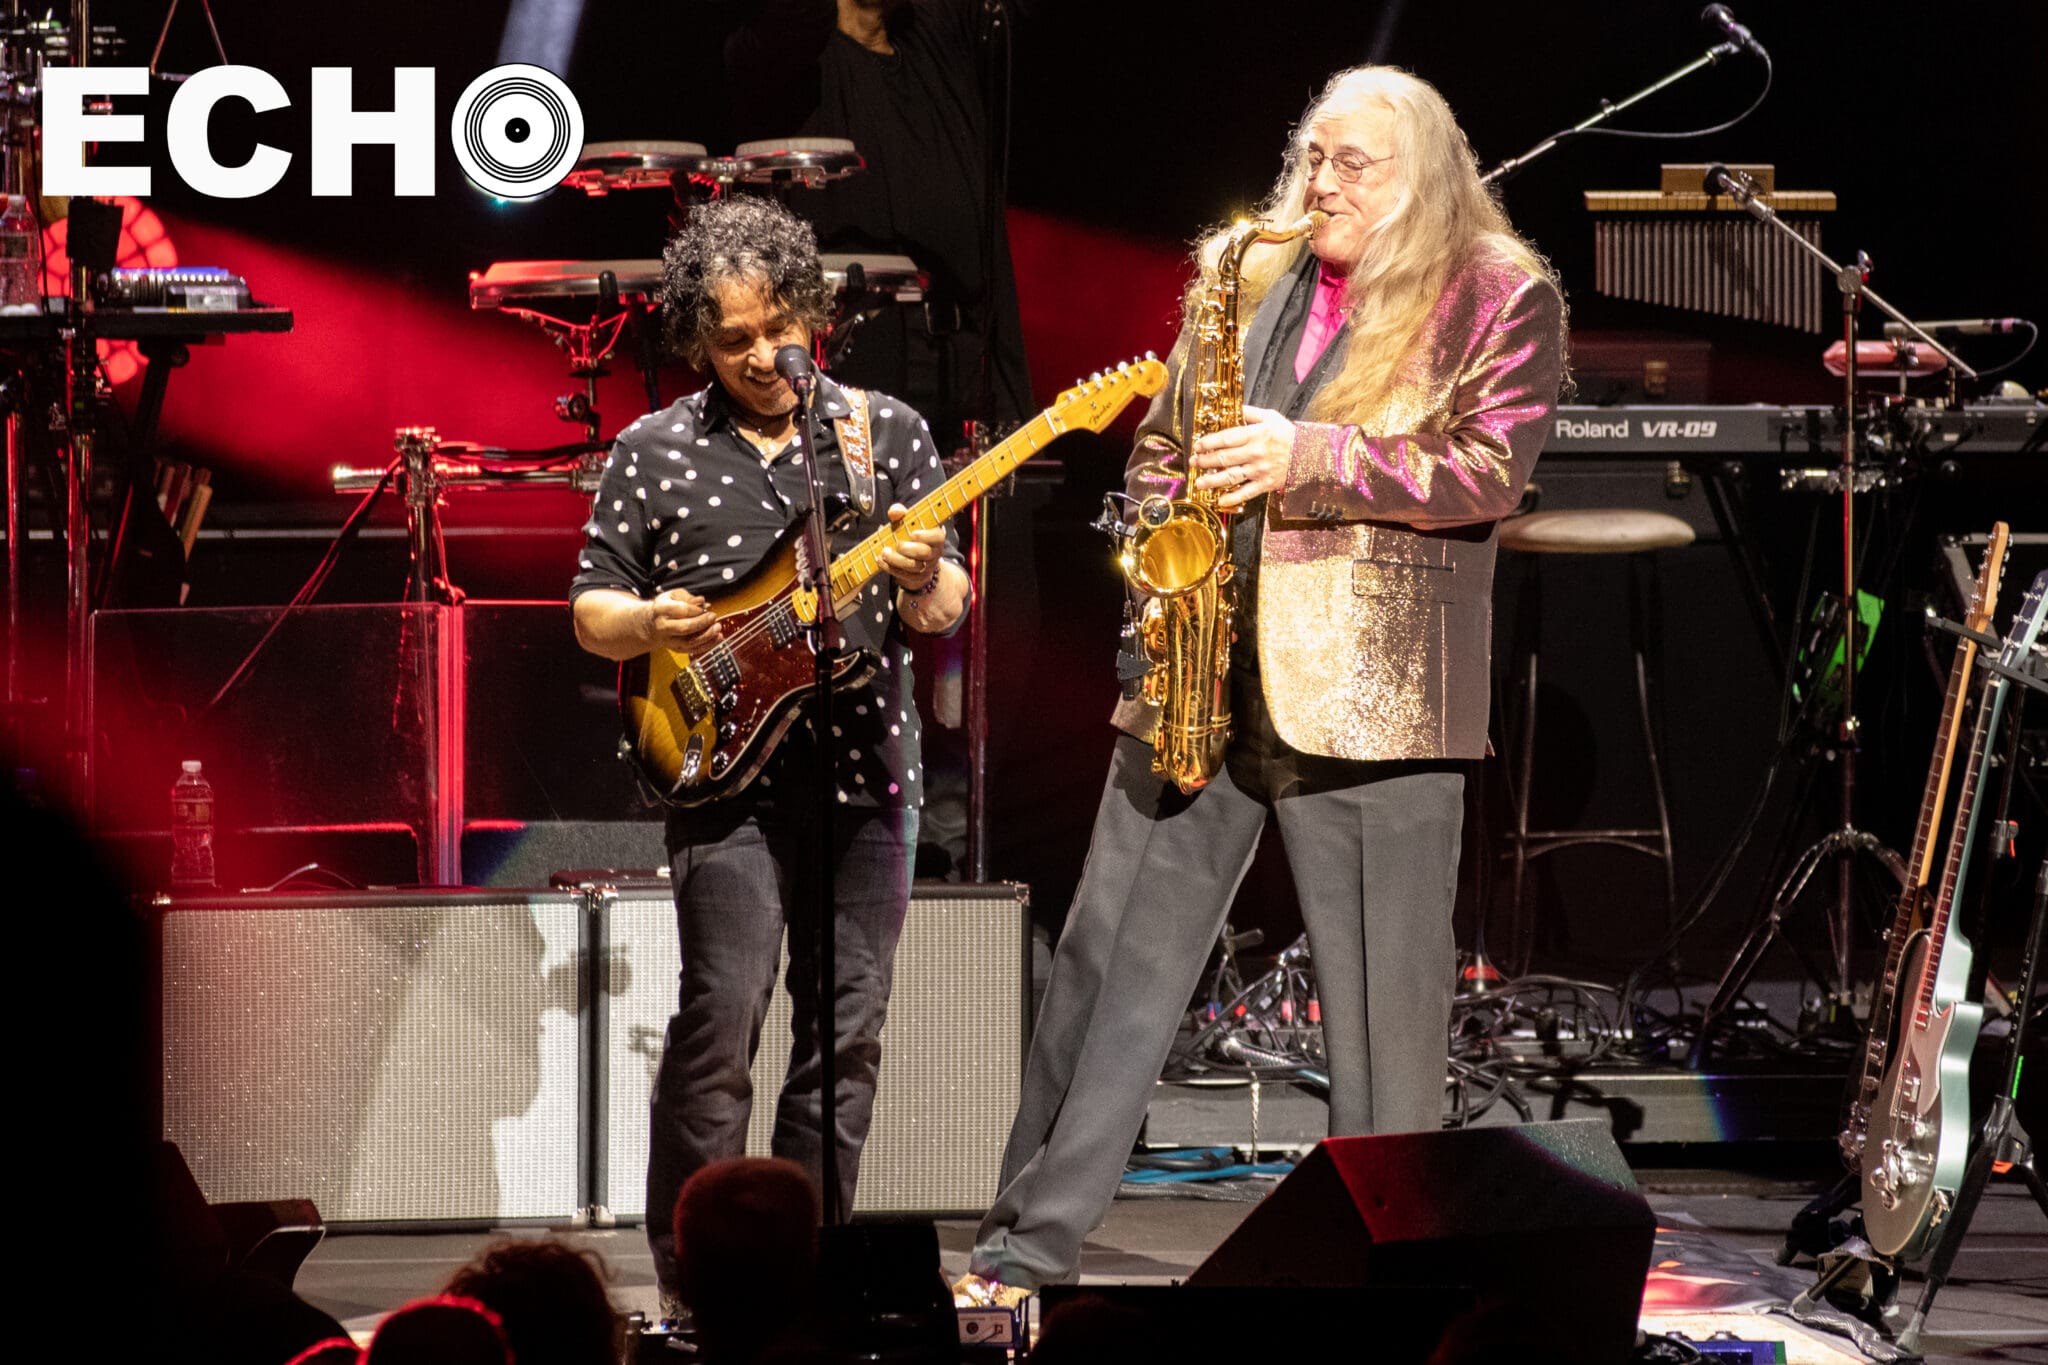 Hall and Oates KickOff Headlining Tour in Boston ECHO